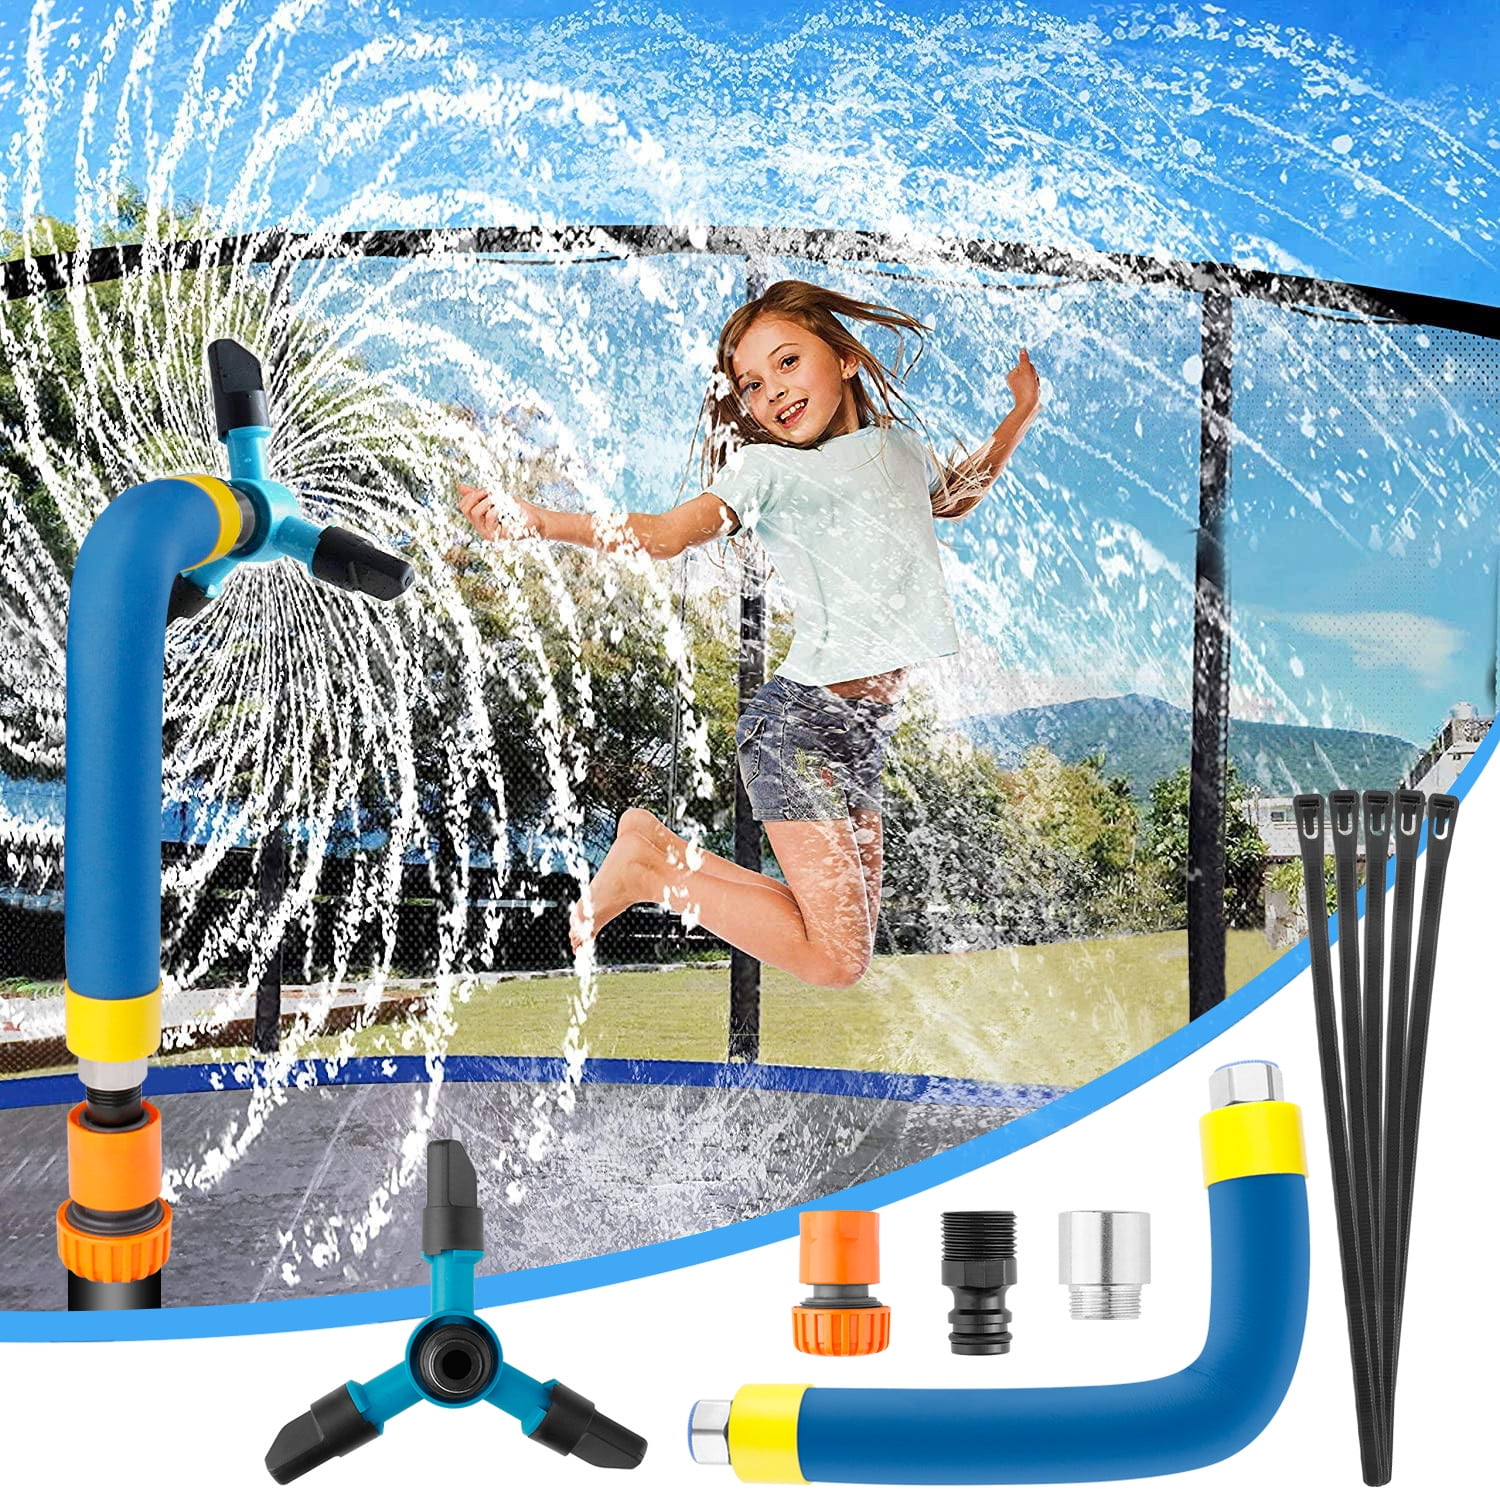 Trampoline Sprinkler for Kids Backyard Toys Stakes Baby Pool Outside Summer waterpark Hose Traveling Accessories Water Slides 